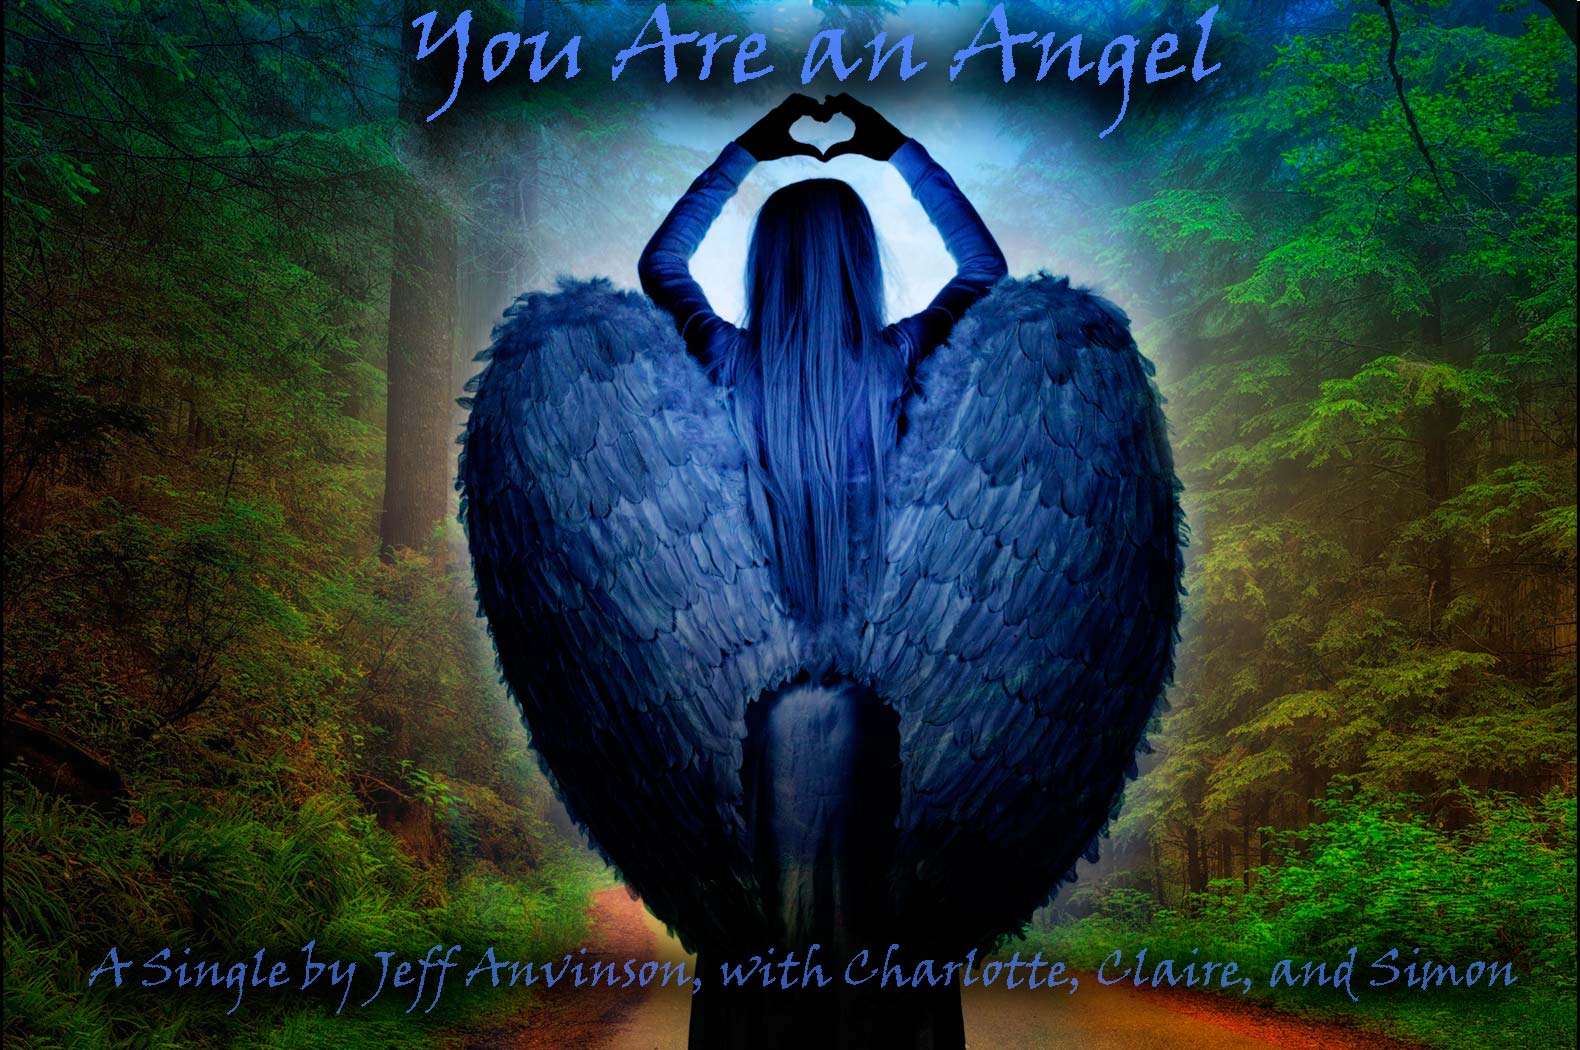 You Are an Angel by Jeff Anvinson, a digital single available on iTunes and Amazon